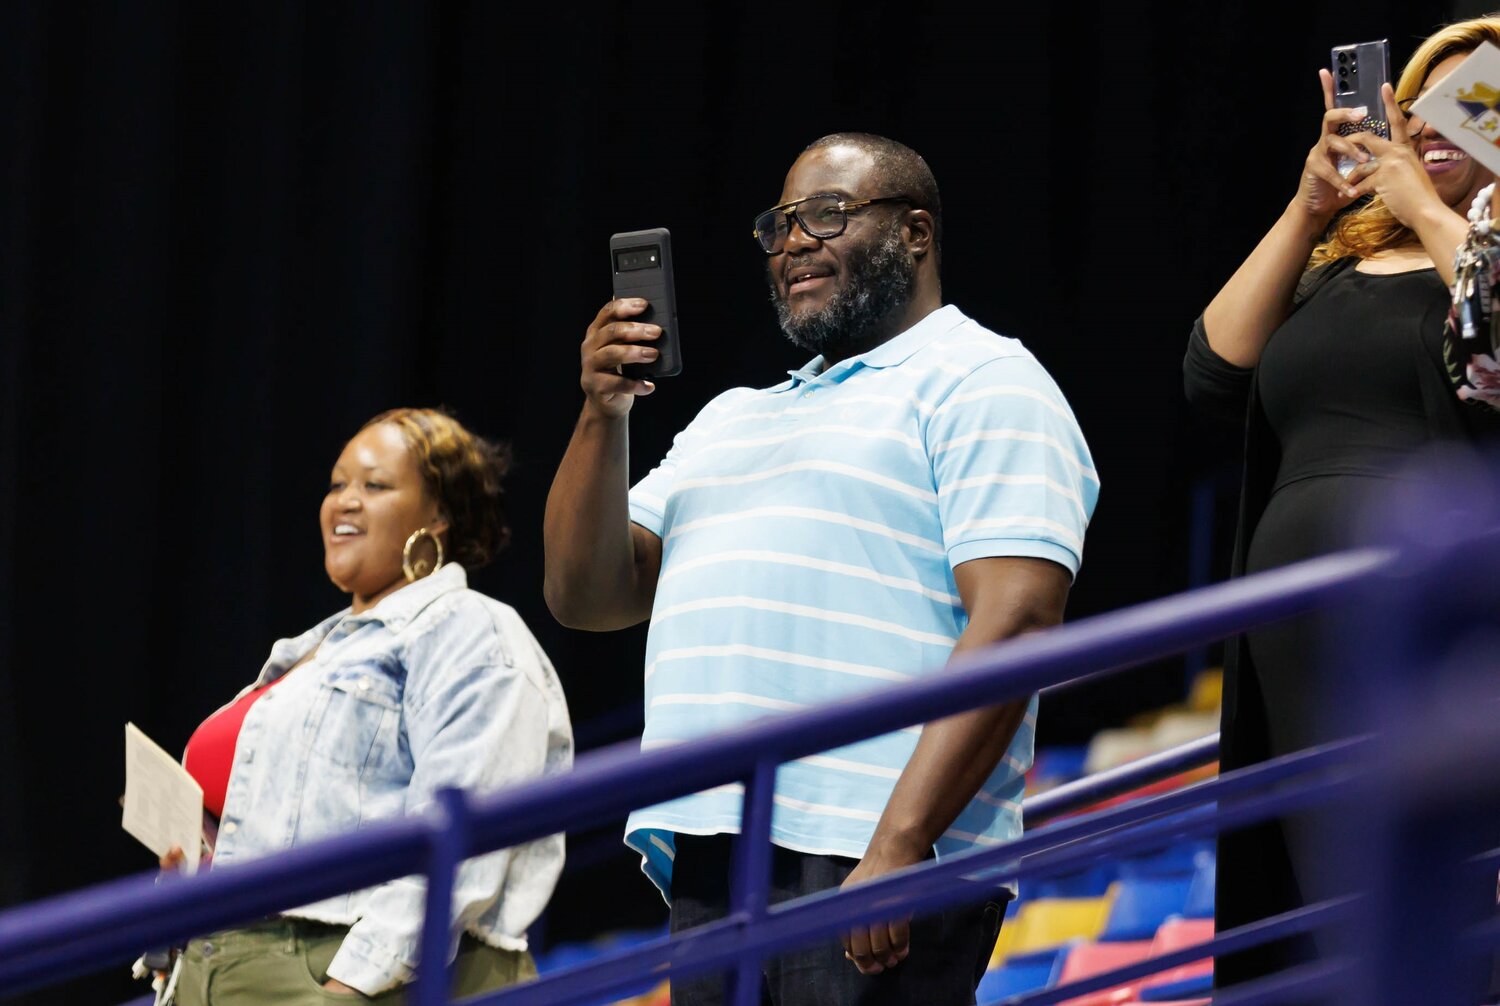 Spectators capture video of the Cumberland Academy Virtual School 2023 commencement Wednesday at the Crown Coliseum.